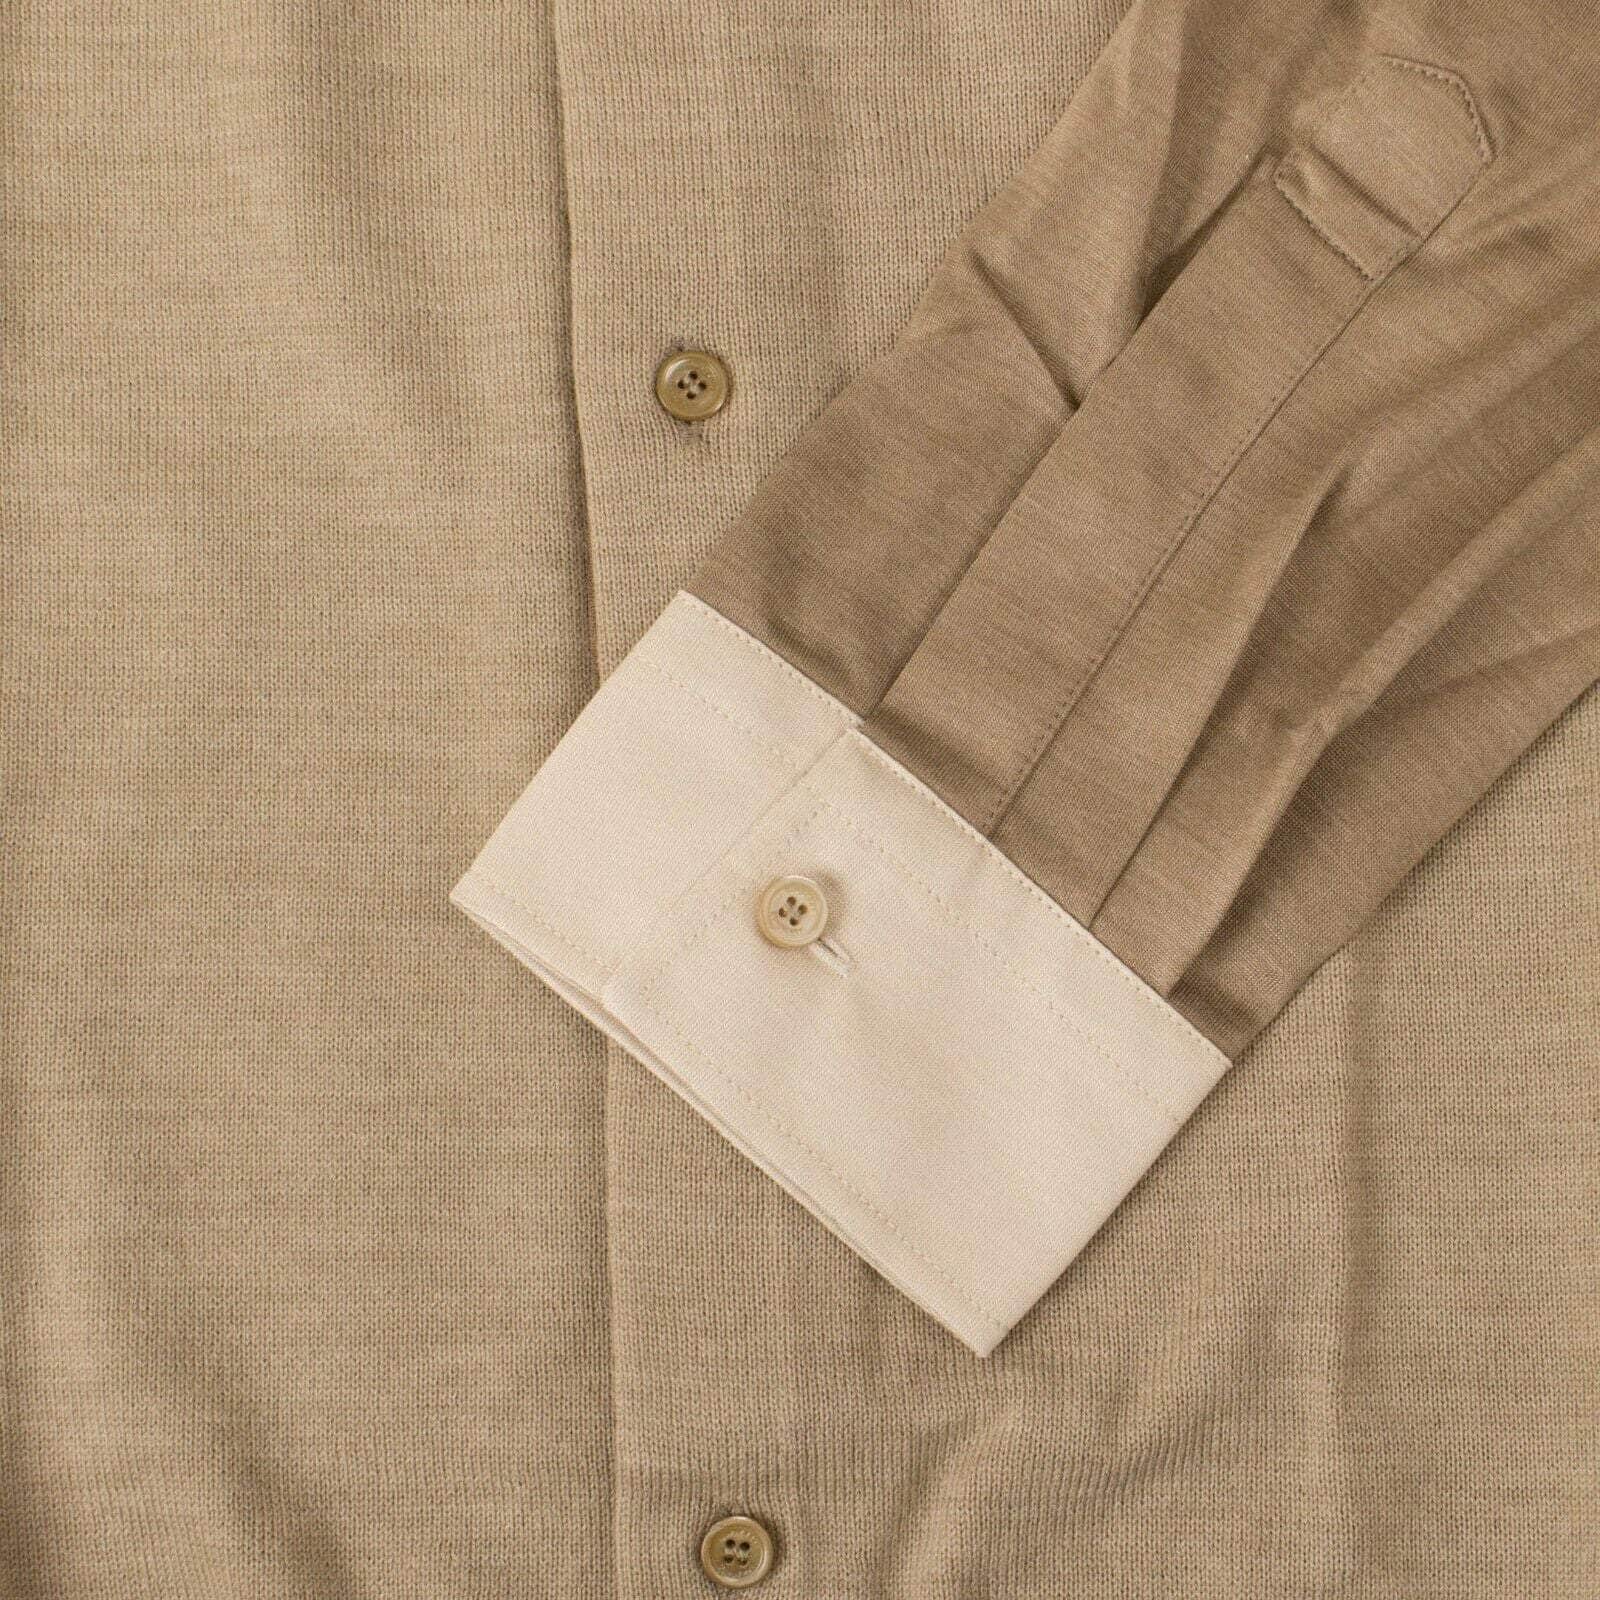 Burberry 1000-2000, burberry, channelenable-all, chicmi, couponcollection, gender-mens, main-clothing, newarrival2, size-37-eu, size-38-eu, size-39-eu, size-40-eu Burberry Men's Tan And Brown Multicolor Collar Shirt